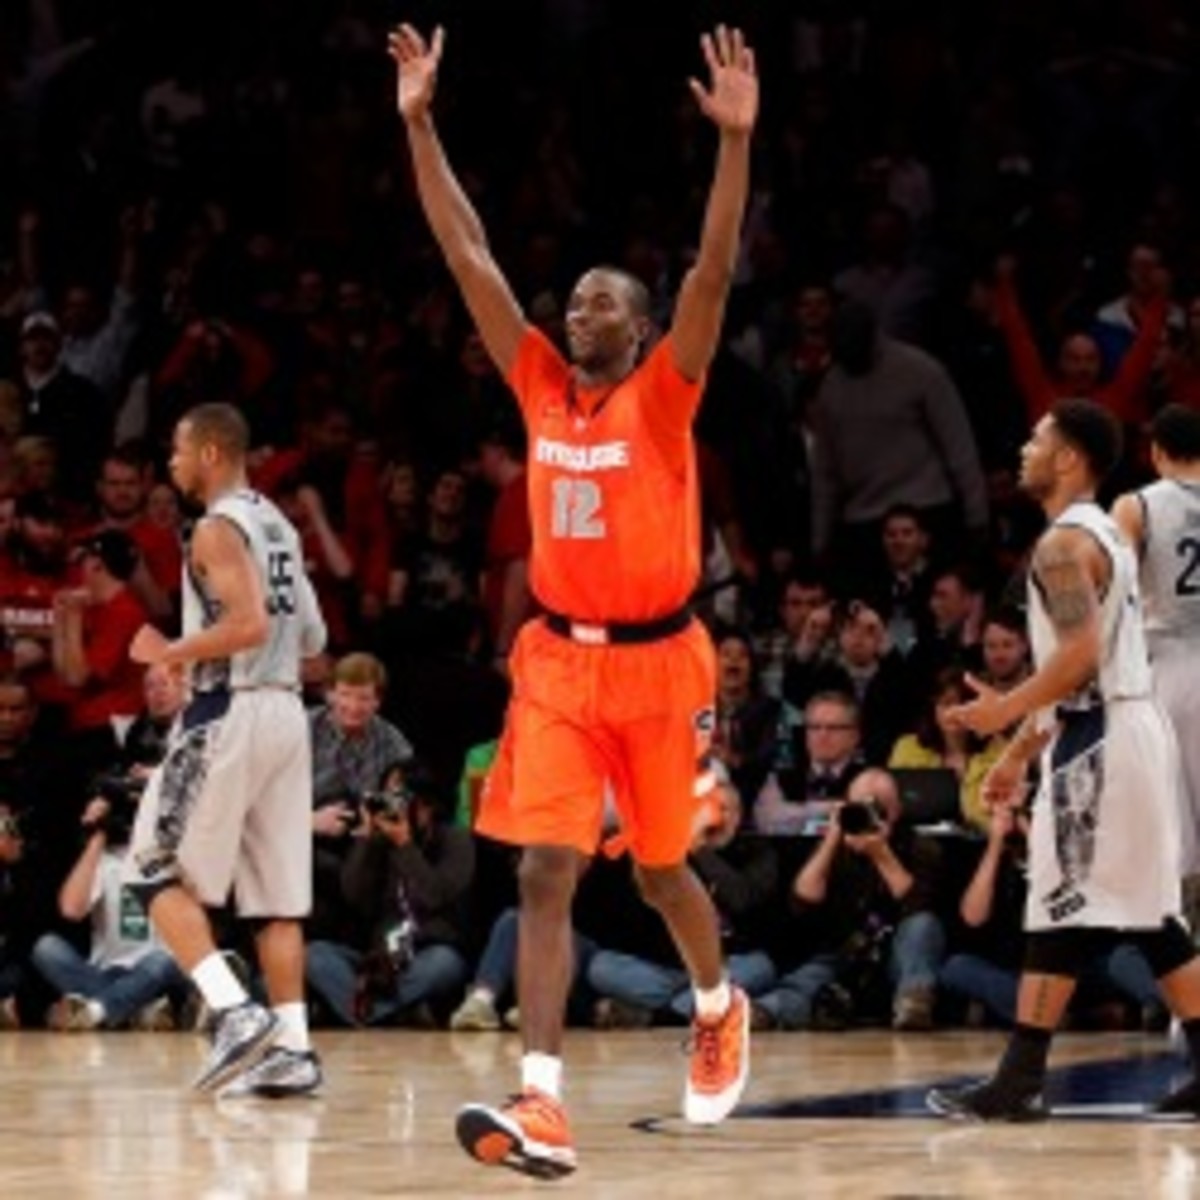 Baye Keita #12 of the Syracuse Orange celebrates after Syracuse won 58-55 in overtime against the Georgetown Hoyas.  (Photo by Chris Chambers/Getty Images)